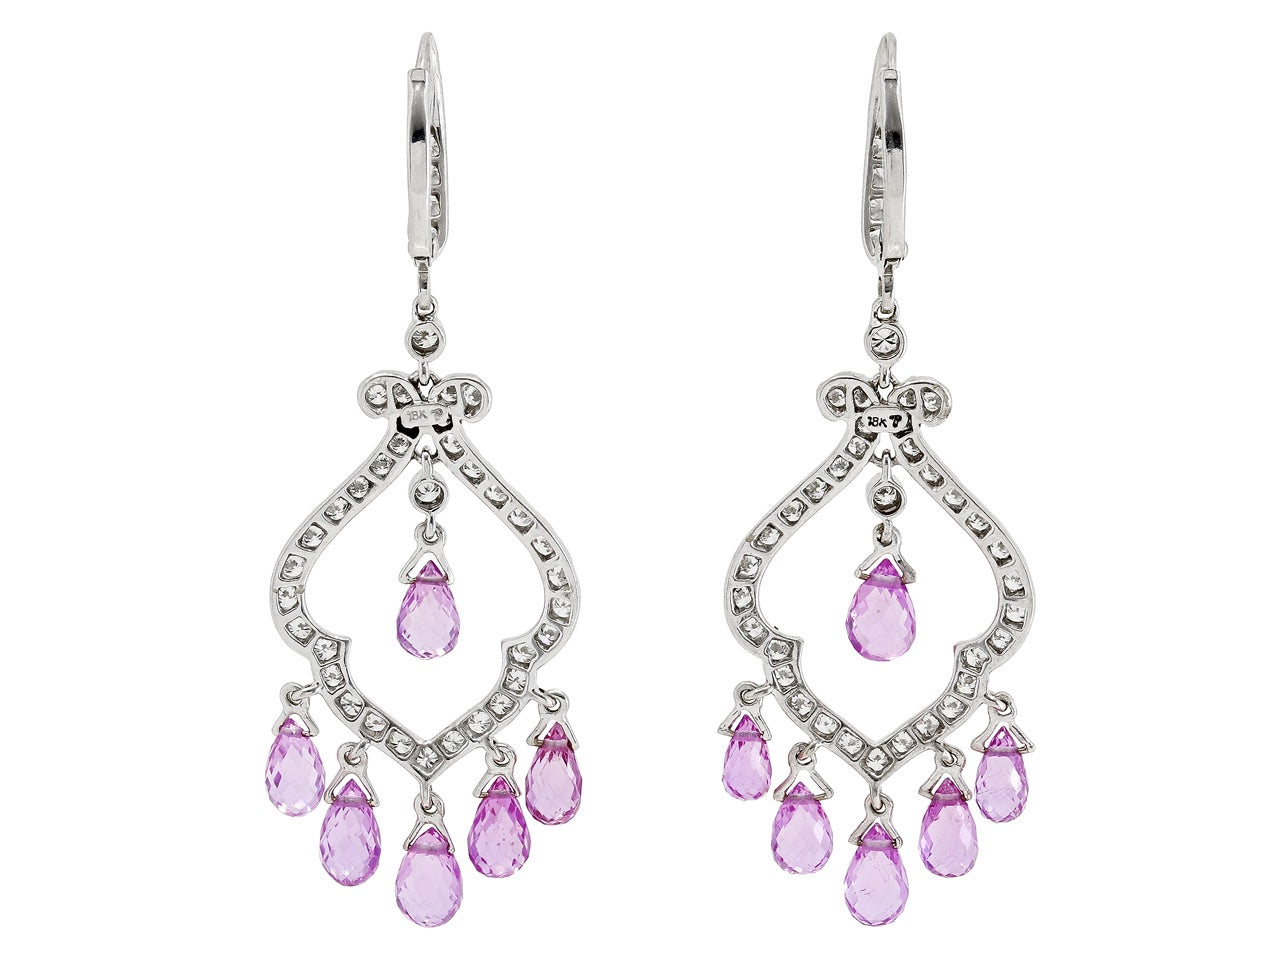 Diamond and Pink Sapphire Chandelier Earrings in 18K White Gold